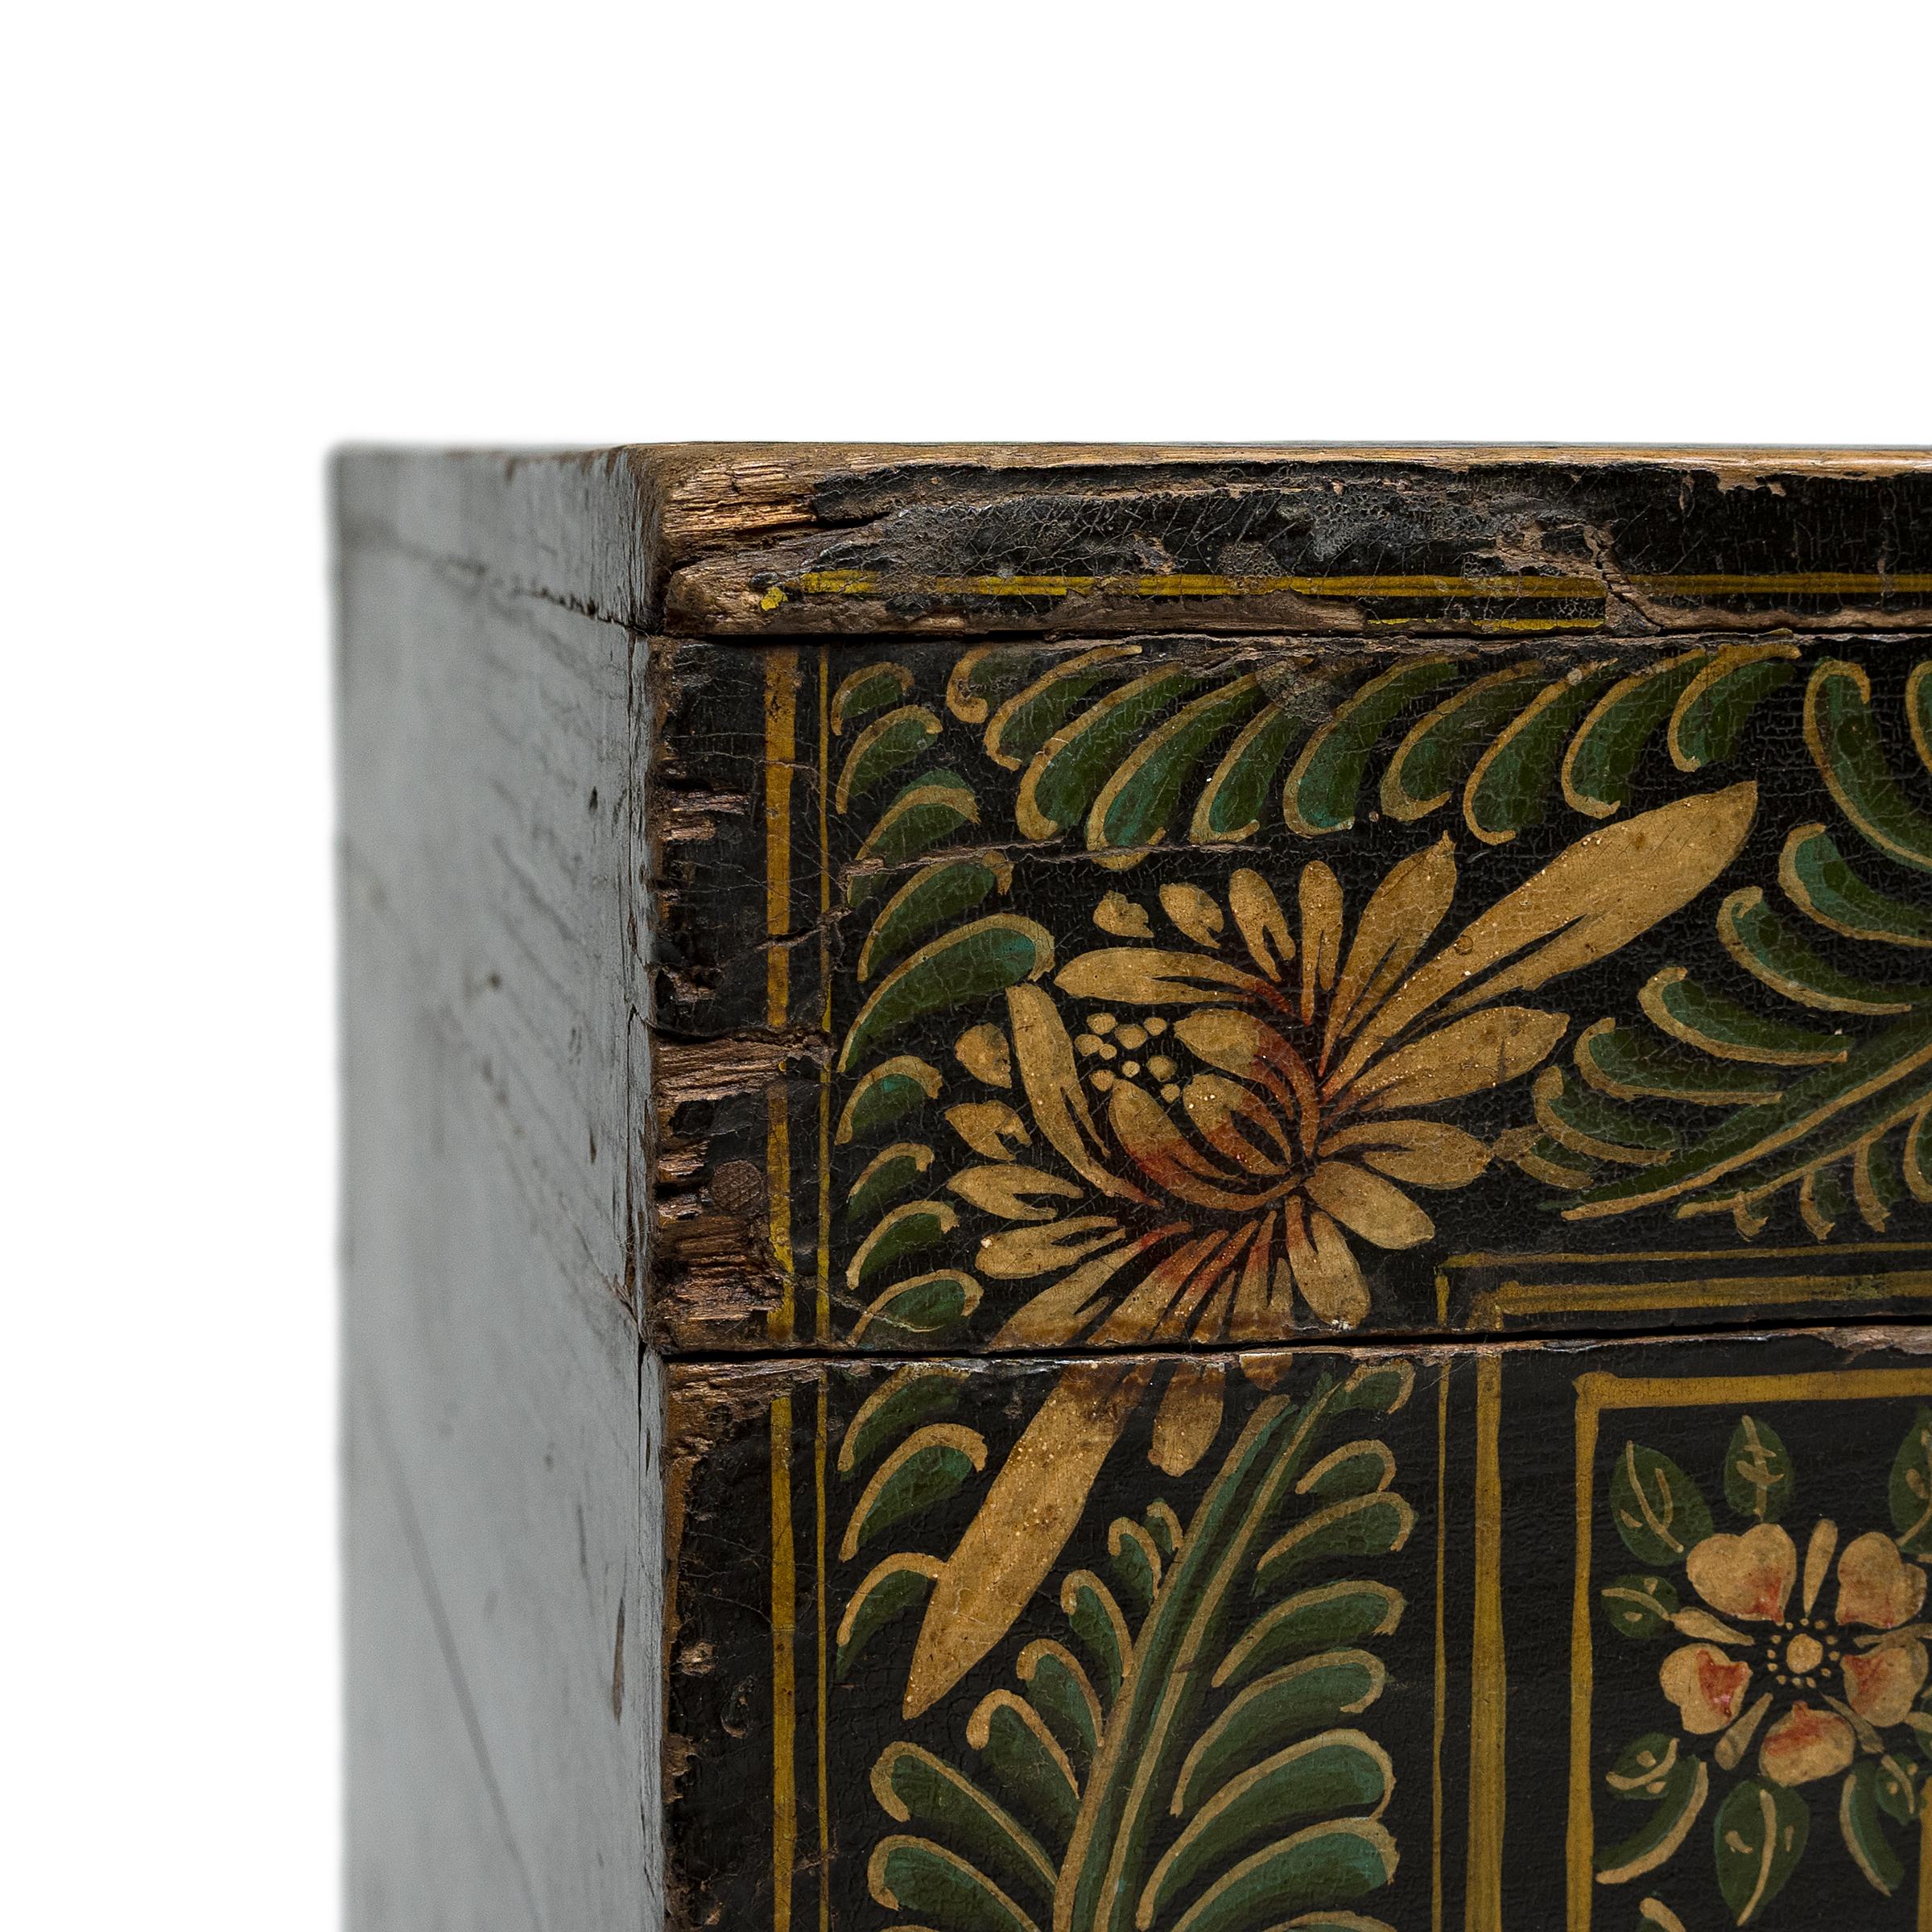 Chinese Painted Festival Trunk, c. 1820 For Sale 4